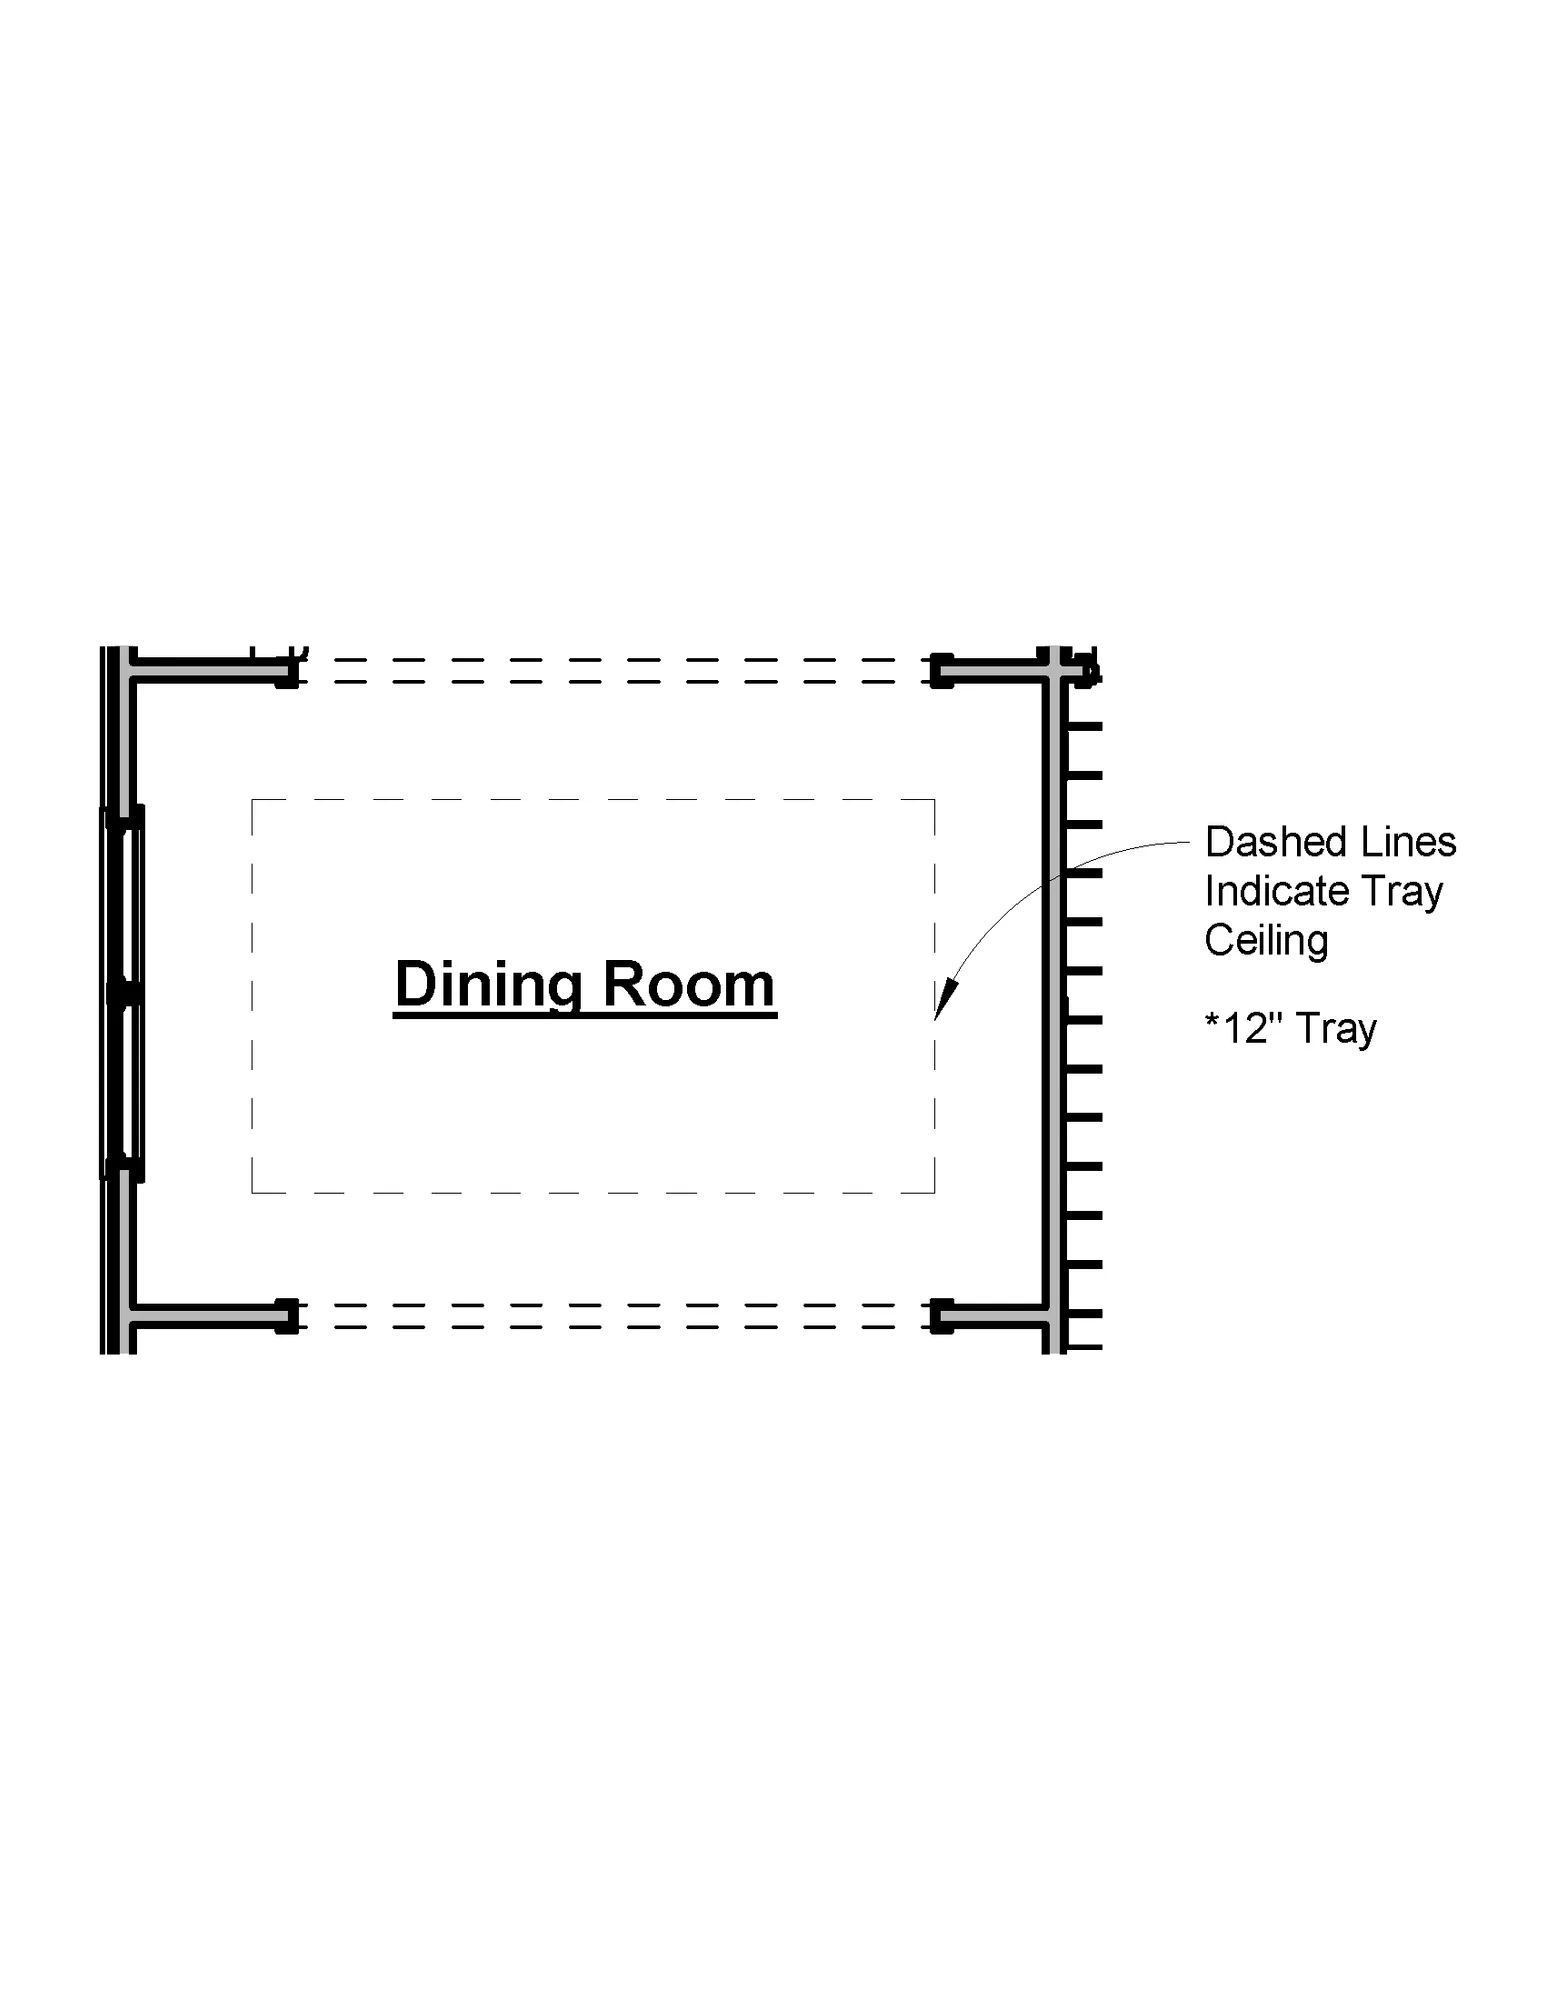 Dining Room-Tray Ceiling Option - undefined